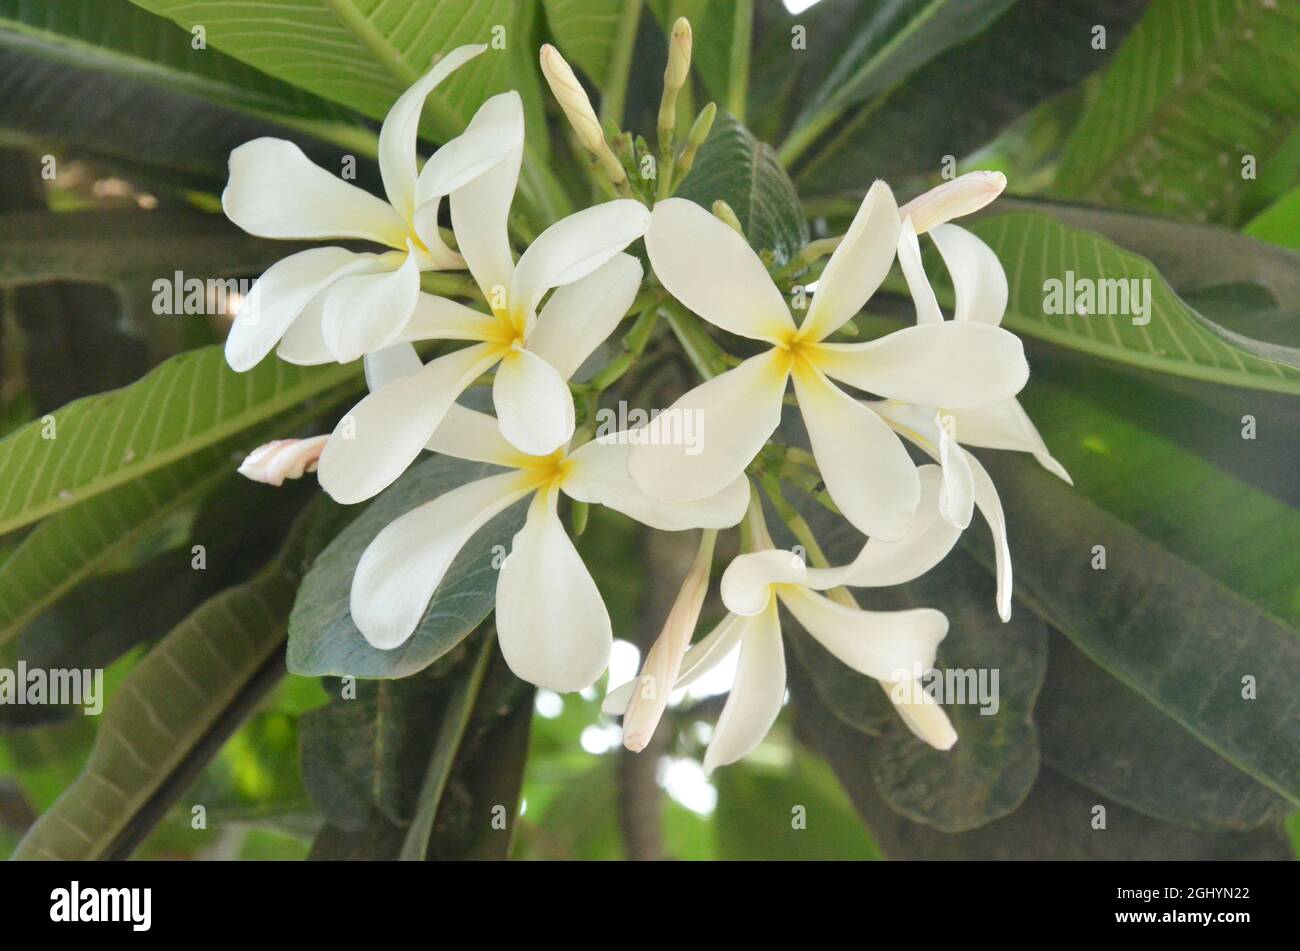 SELECTIVE FOCUS ON MULTIPLE FRANGIPANI FLOWERS WITH GREEN LEAVES. Stock Photo